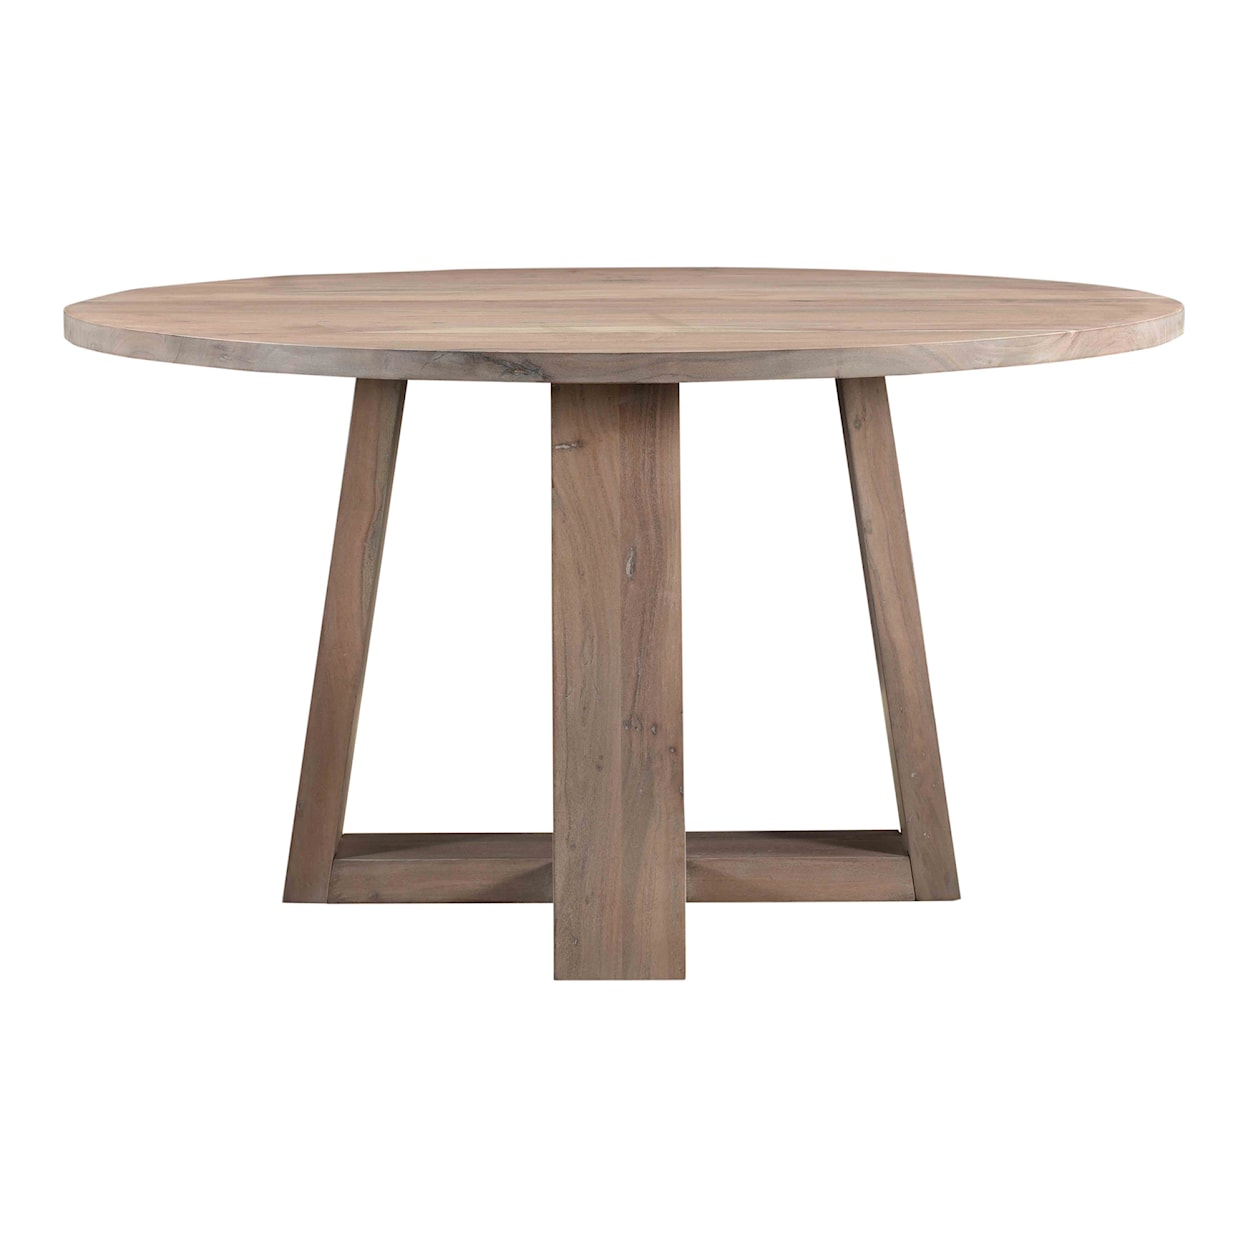 Moe's Home Collection Tanya Tanya Round Dining Table